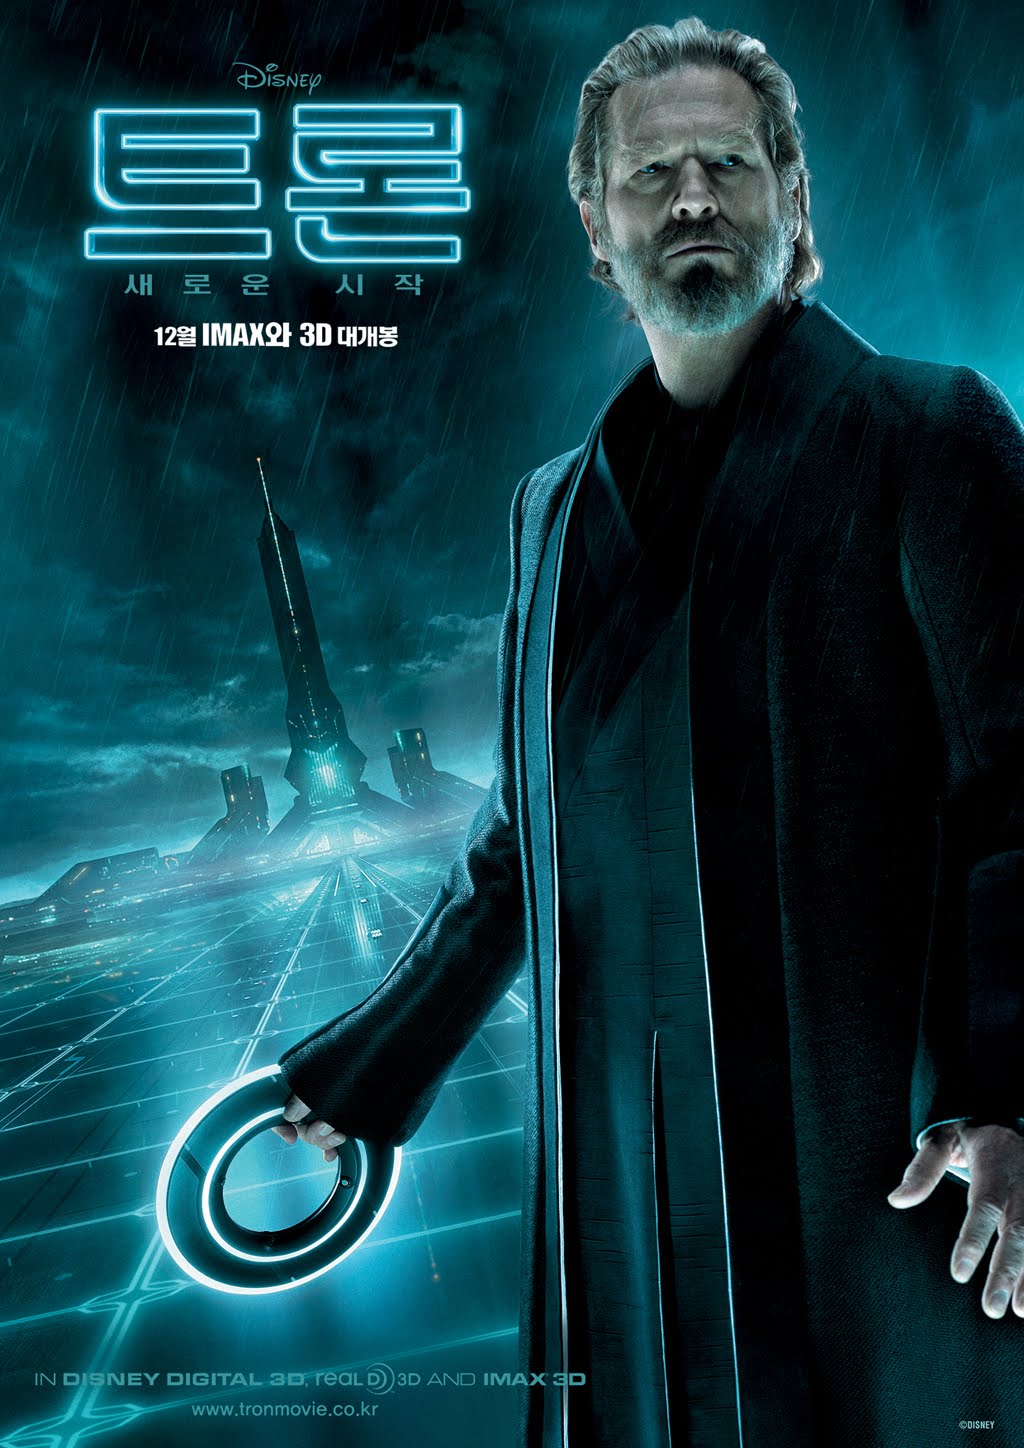 Tron Legacy Character Posters. Teaser Trailer